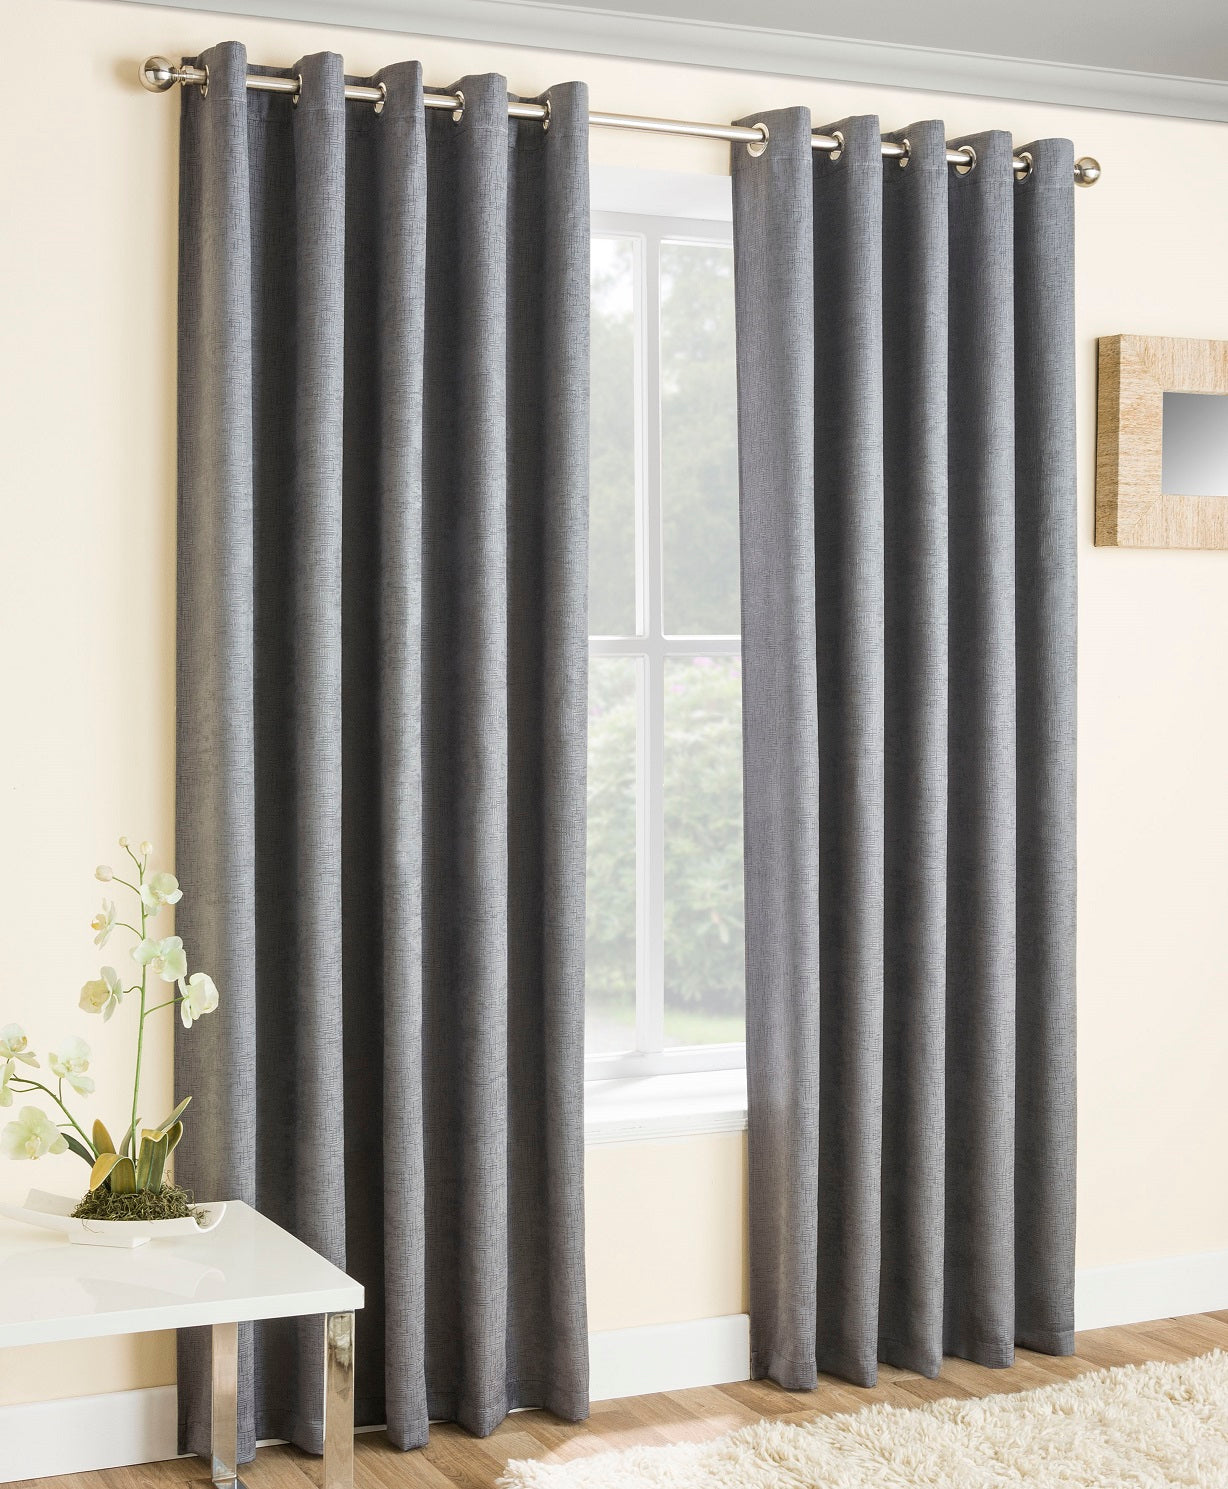 90x90" Vogue Blockout Lined Curtains - Silver Grey